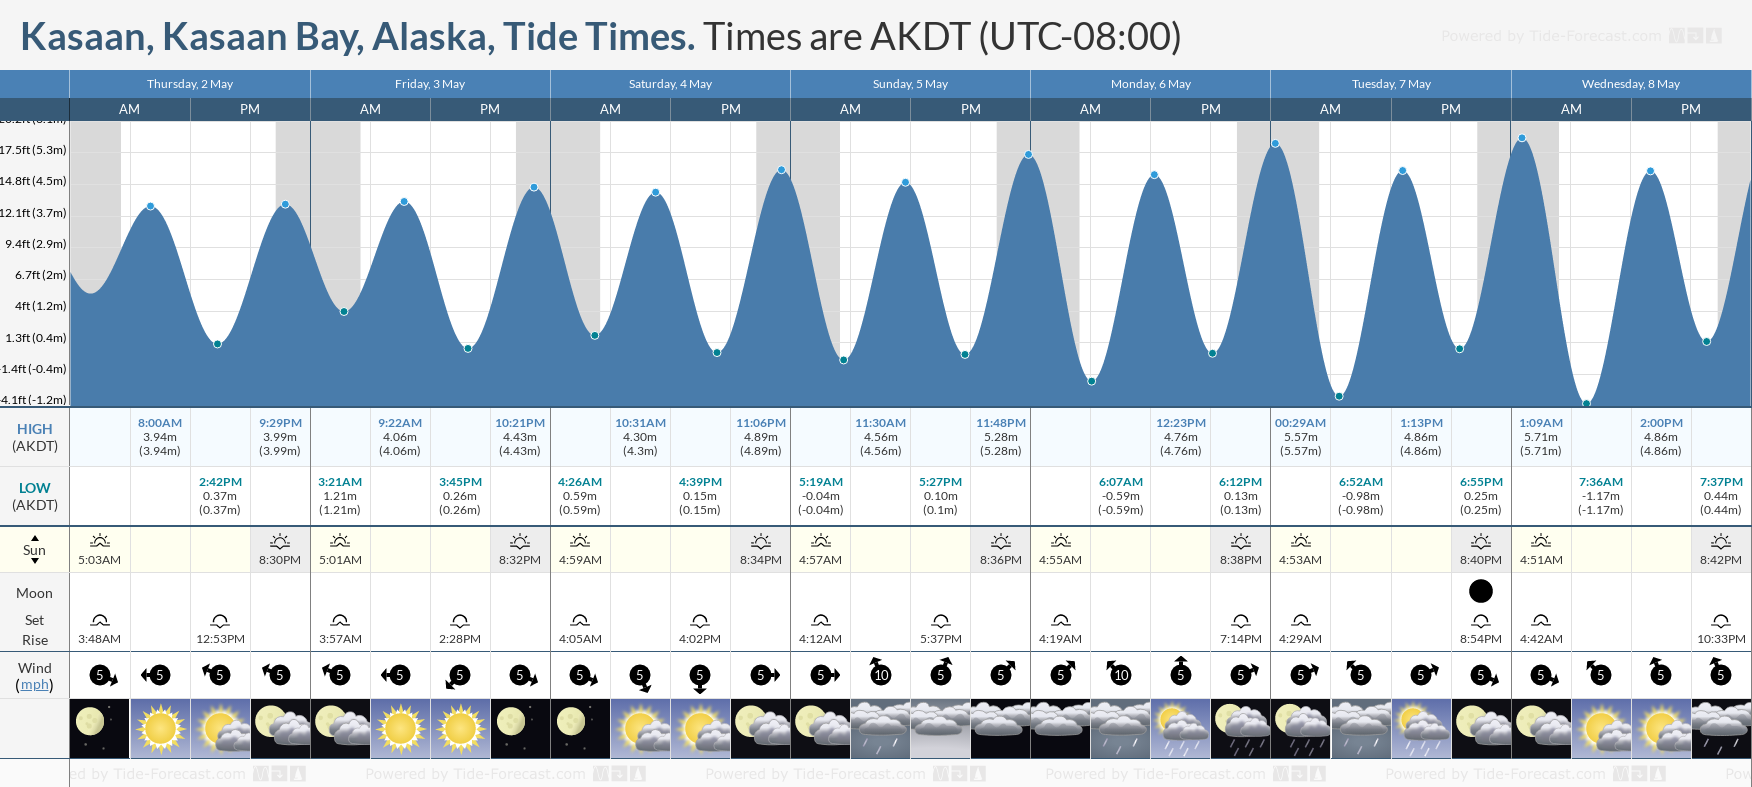 Kasaan, Kasaan Bay, Alaska Tide Chart including high and low tide times for the next 7 days